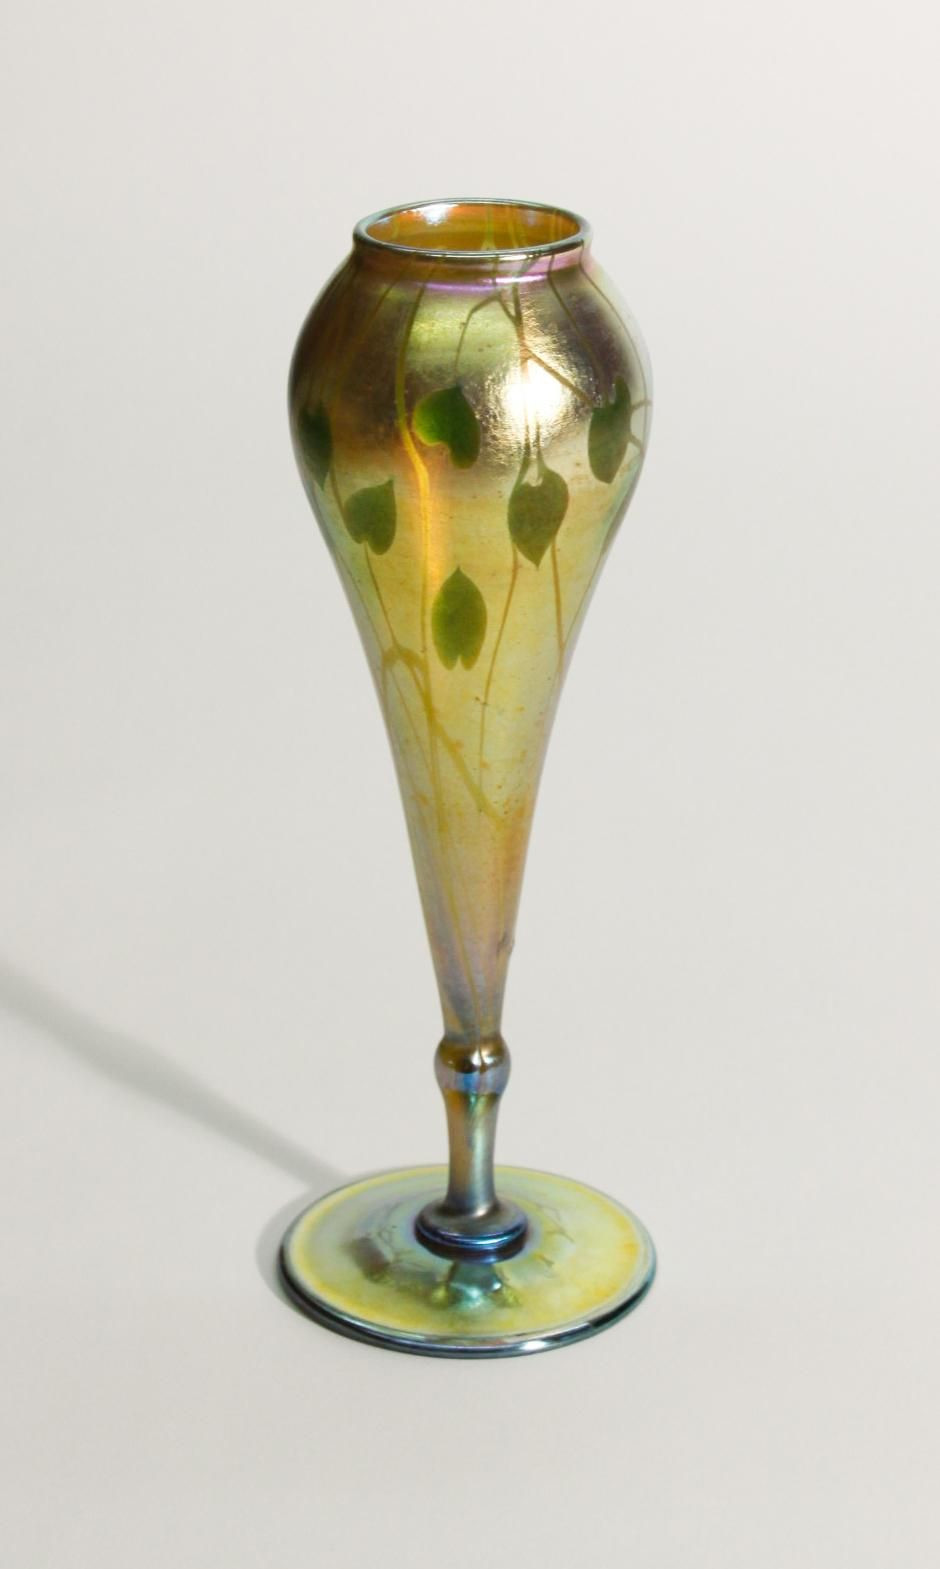 23 Nice Tiffany Vines Vase 2024 free download tiffany vines vase of a tiffany studios favrile glass elongated flower form vase decorated throughout a tiffany studios favrile glass elongated flower form vase decorated with leaves and vin